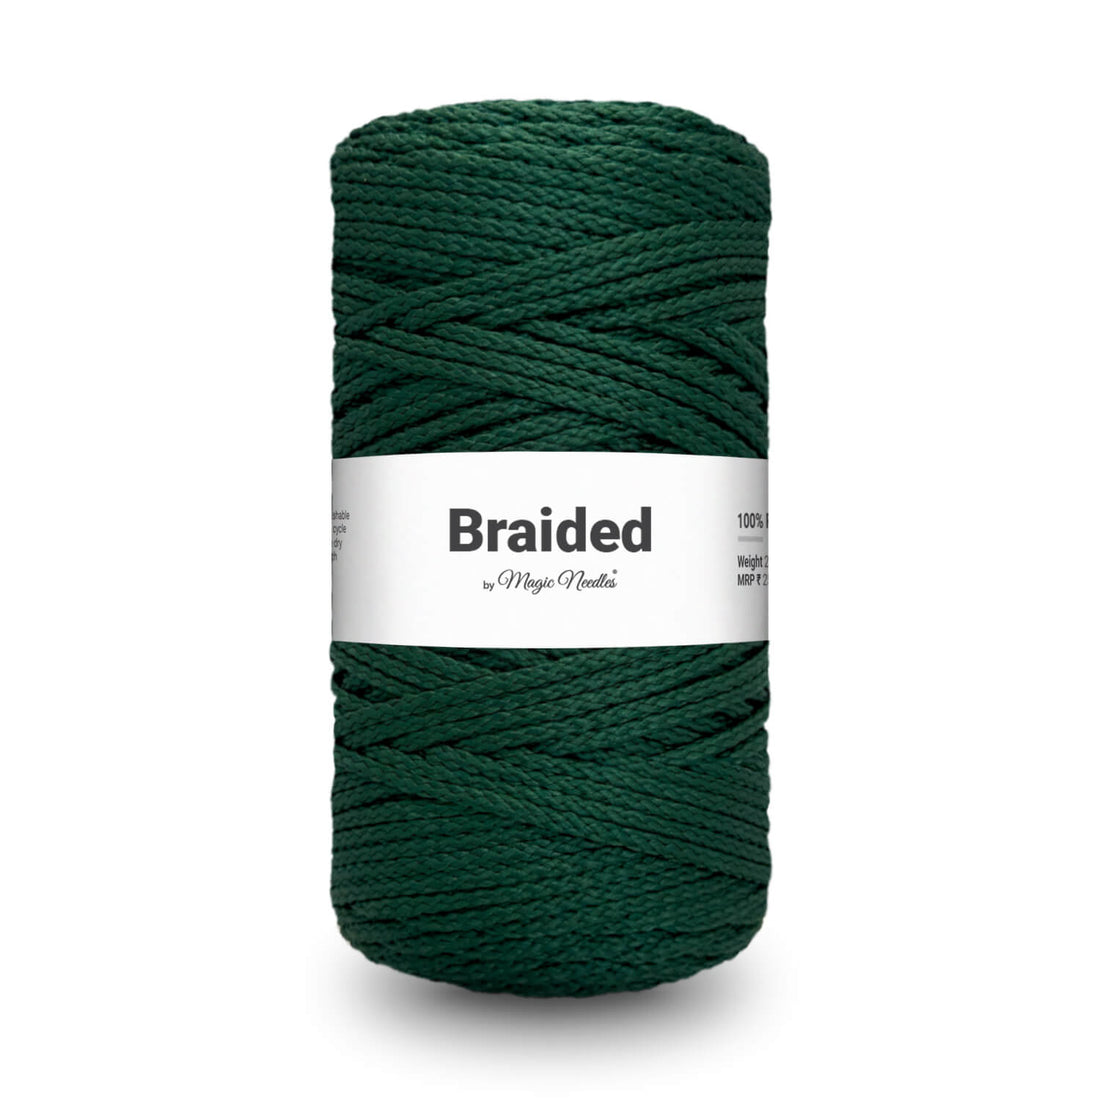 Braided Polyester Rope - Green - 16